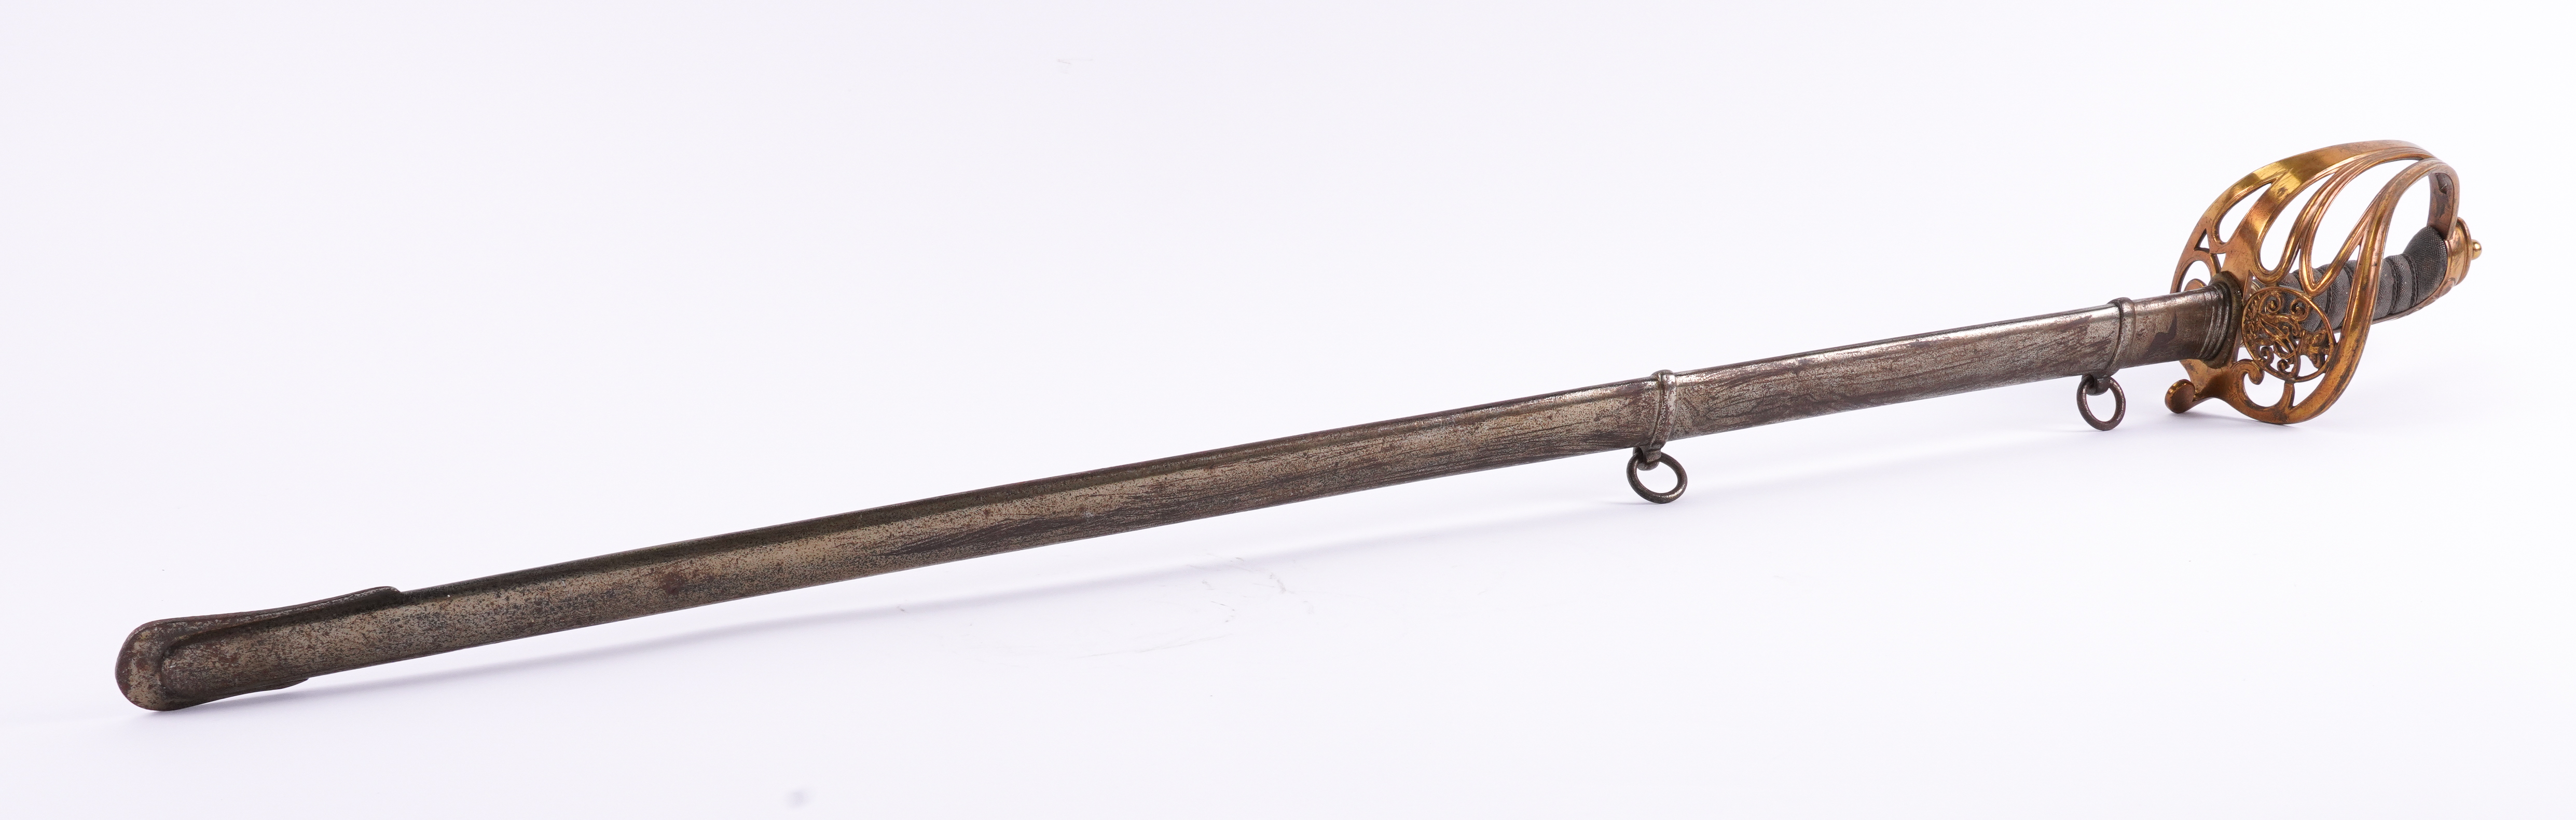 LEGASSICK & BAXTER, LONDON: A VICTORIAN INFANTRY OFFICER'S SWORD AND SCABBARD